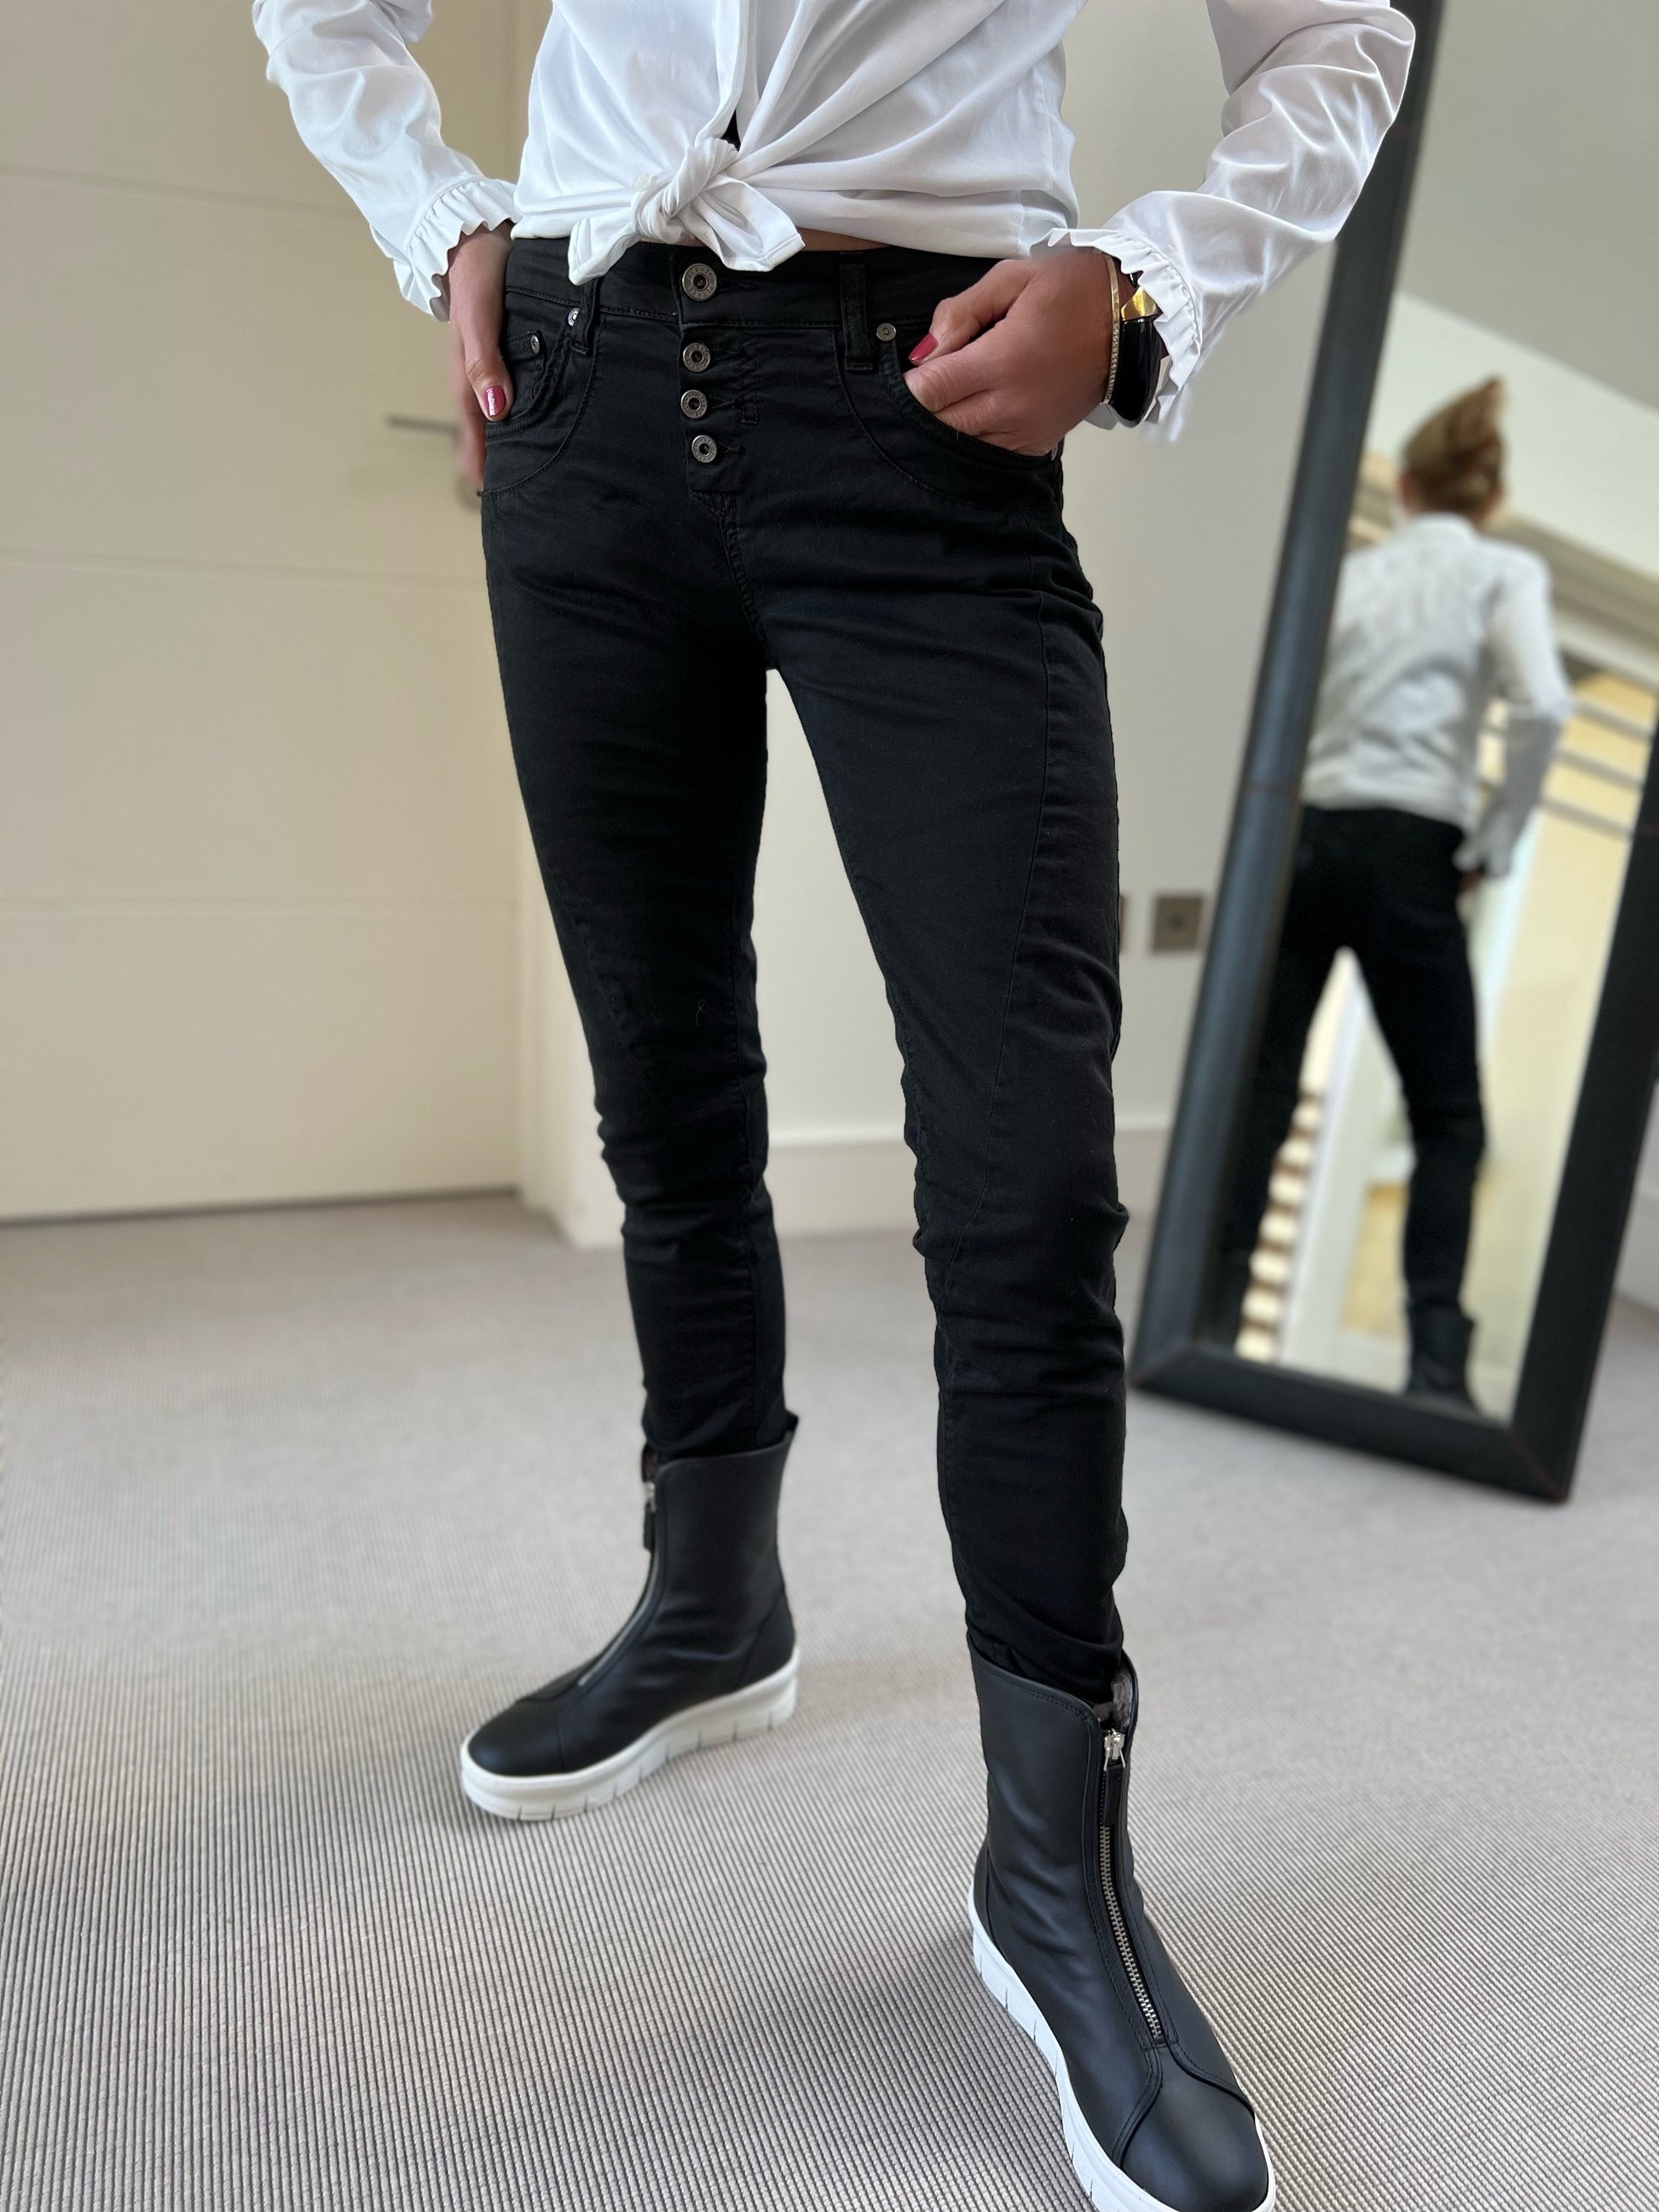 Imperial Italy Imperial Italy Black Stretch Denim Jeans